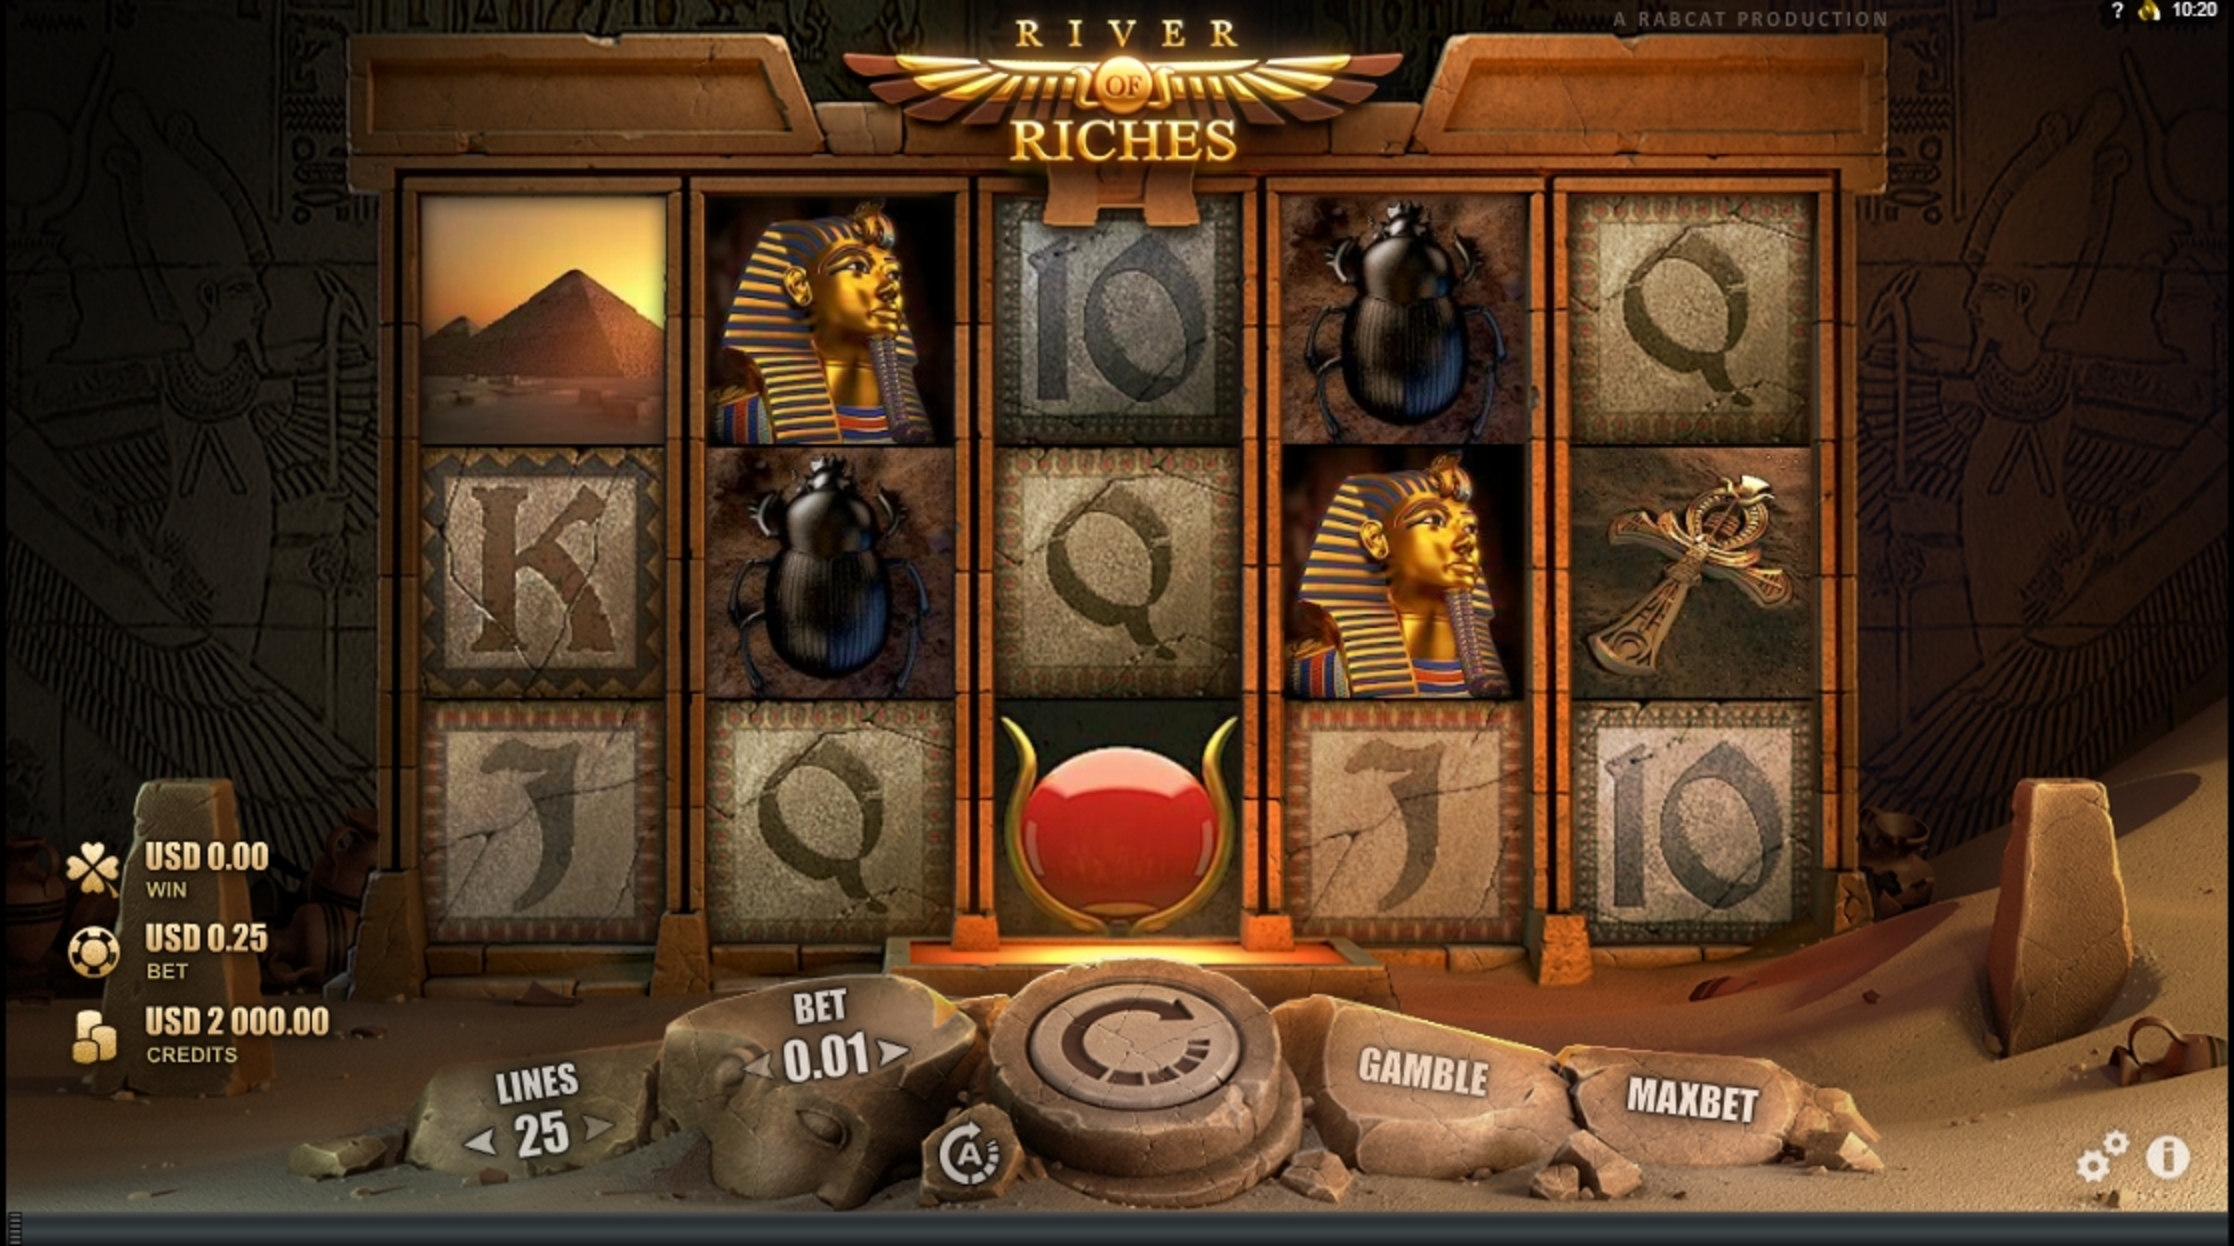 Reels in River of Riches Slot Game by Rabcat